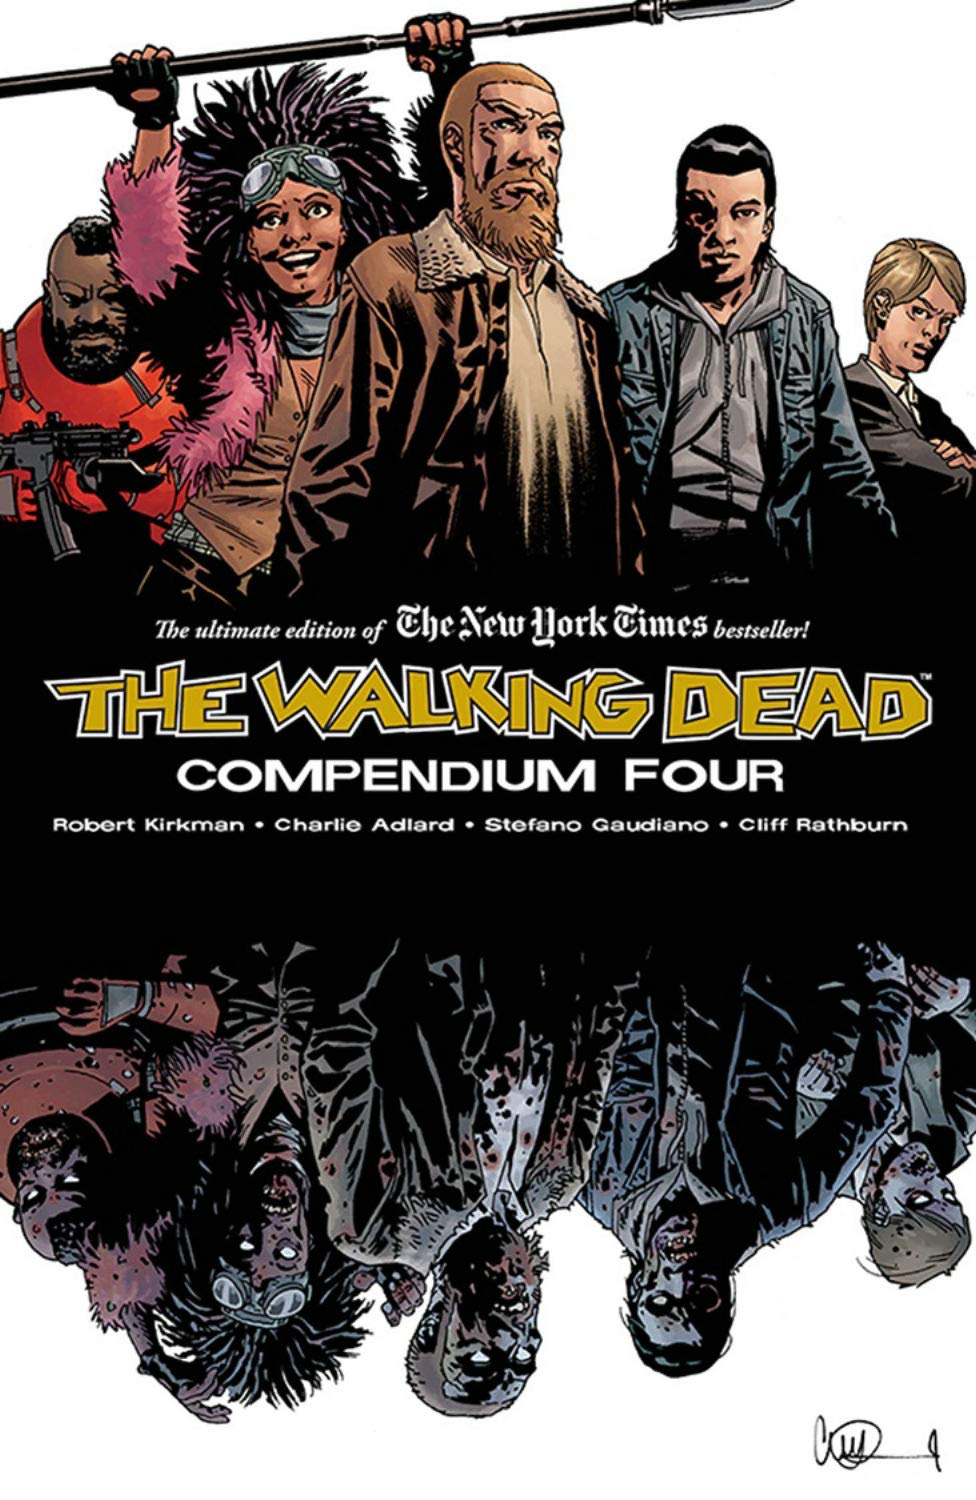 The Walking Dead Compendium Volume 4 Paperback - Graphic Novel - The Hooded Goblin